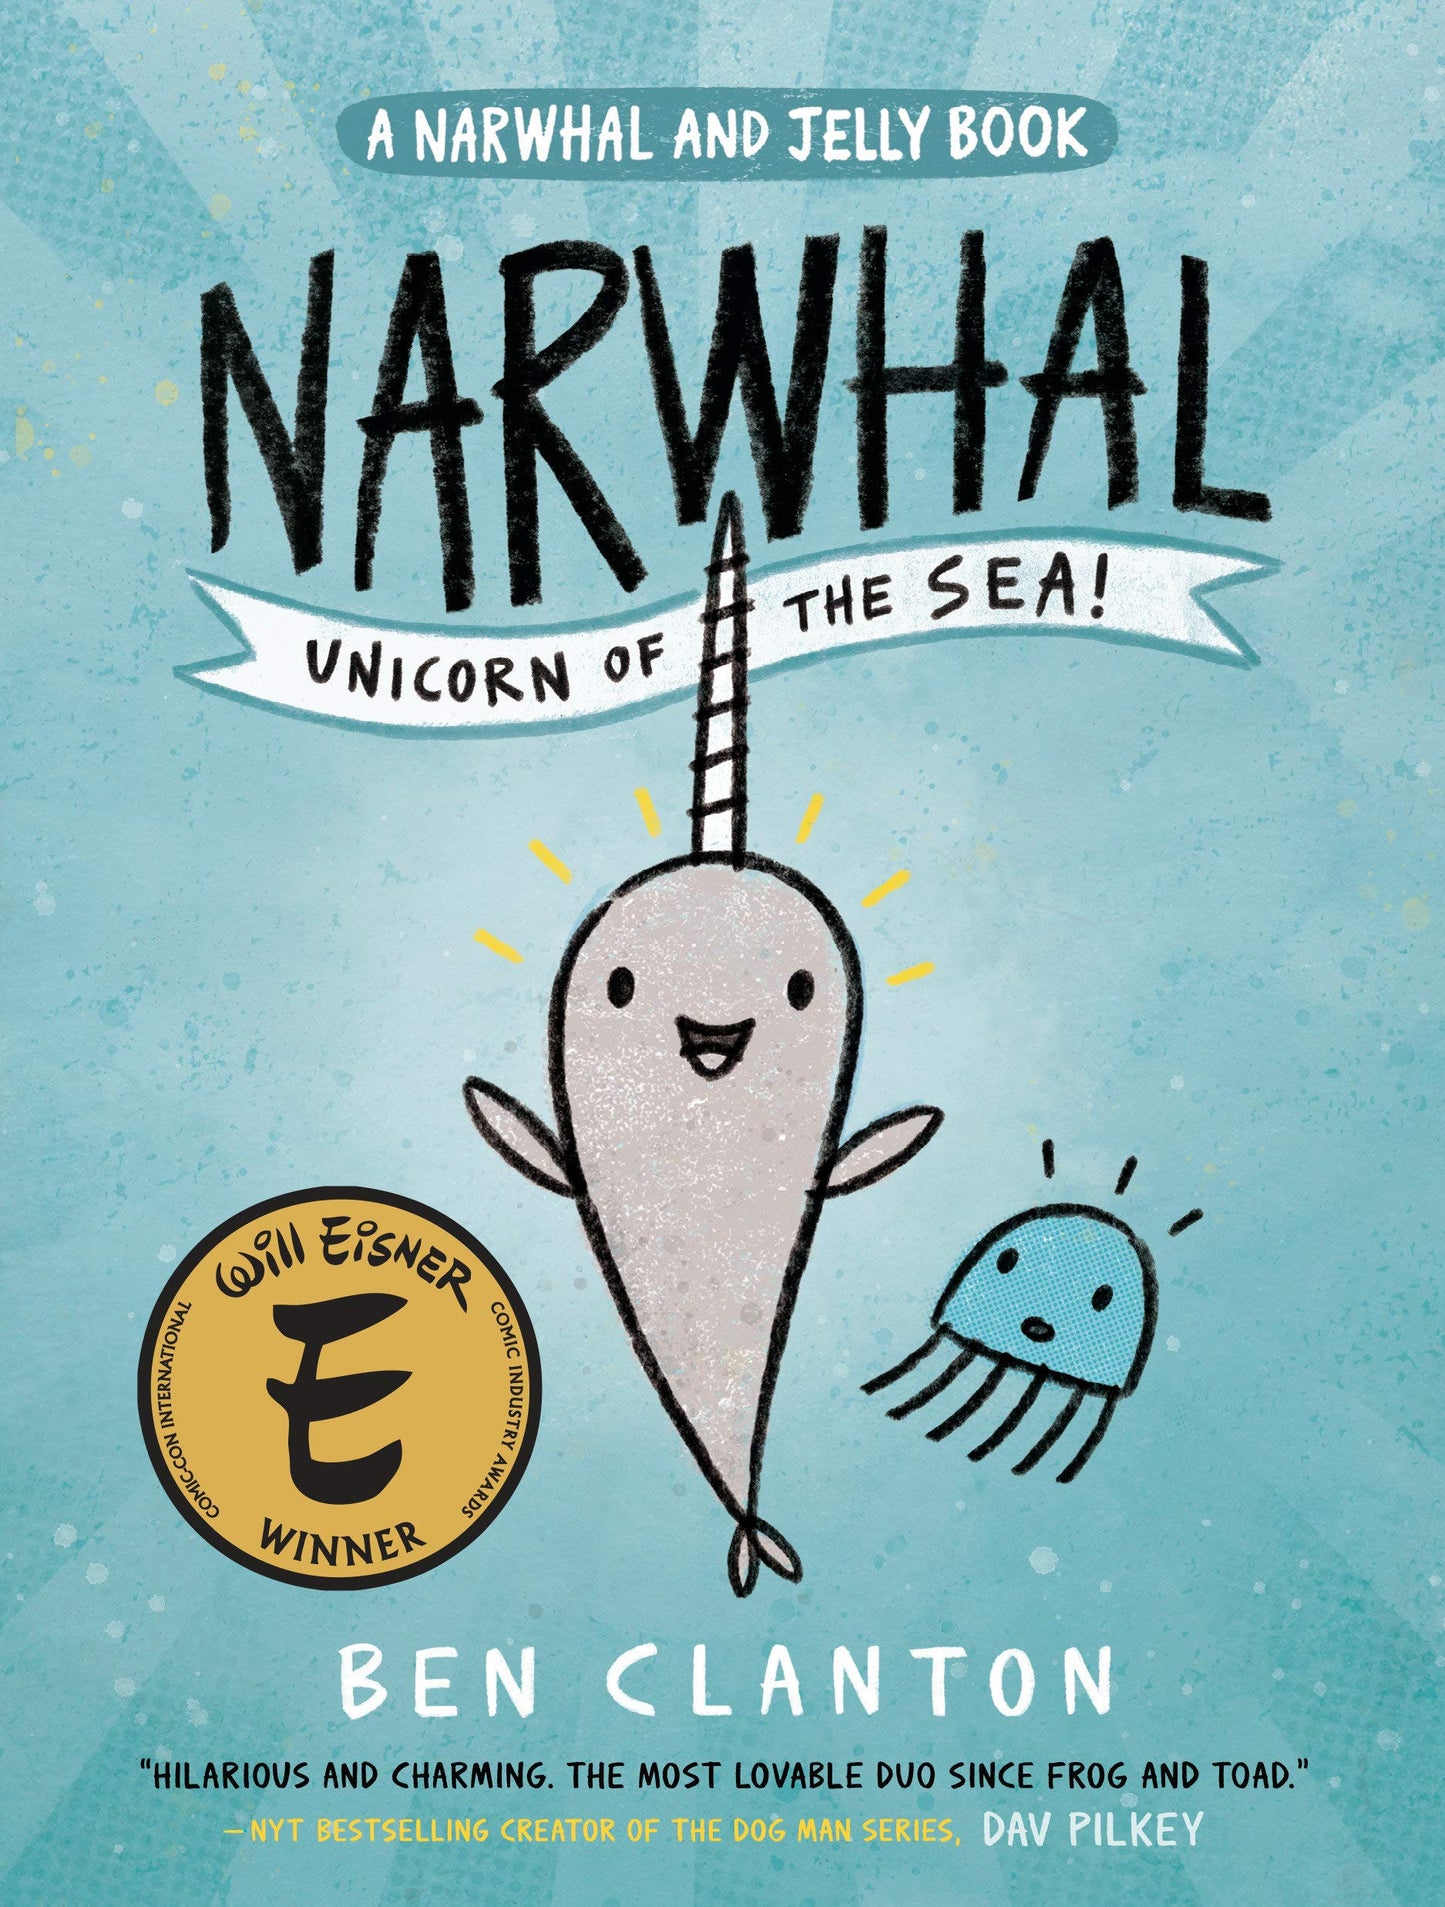 Narwhal & Jelly Books